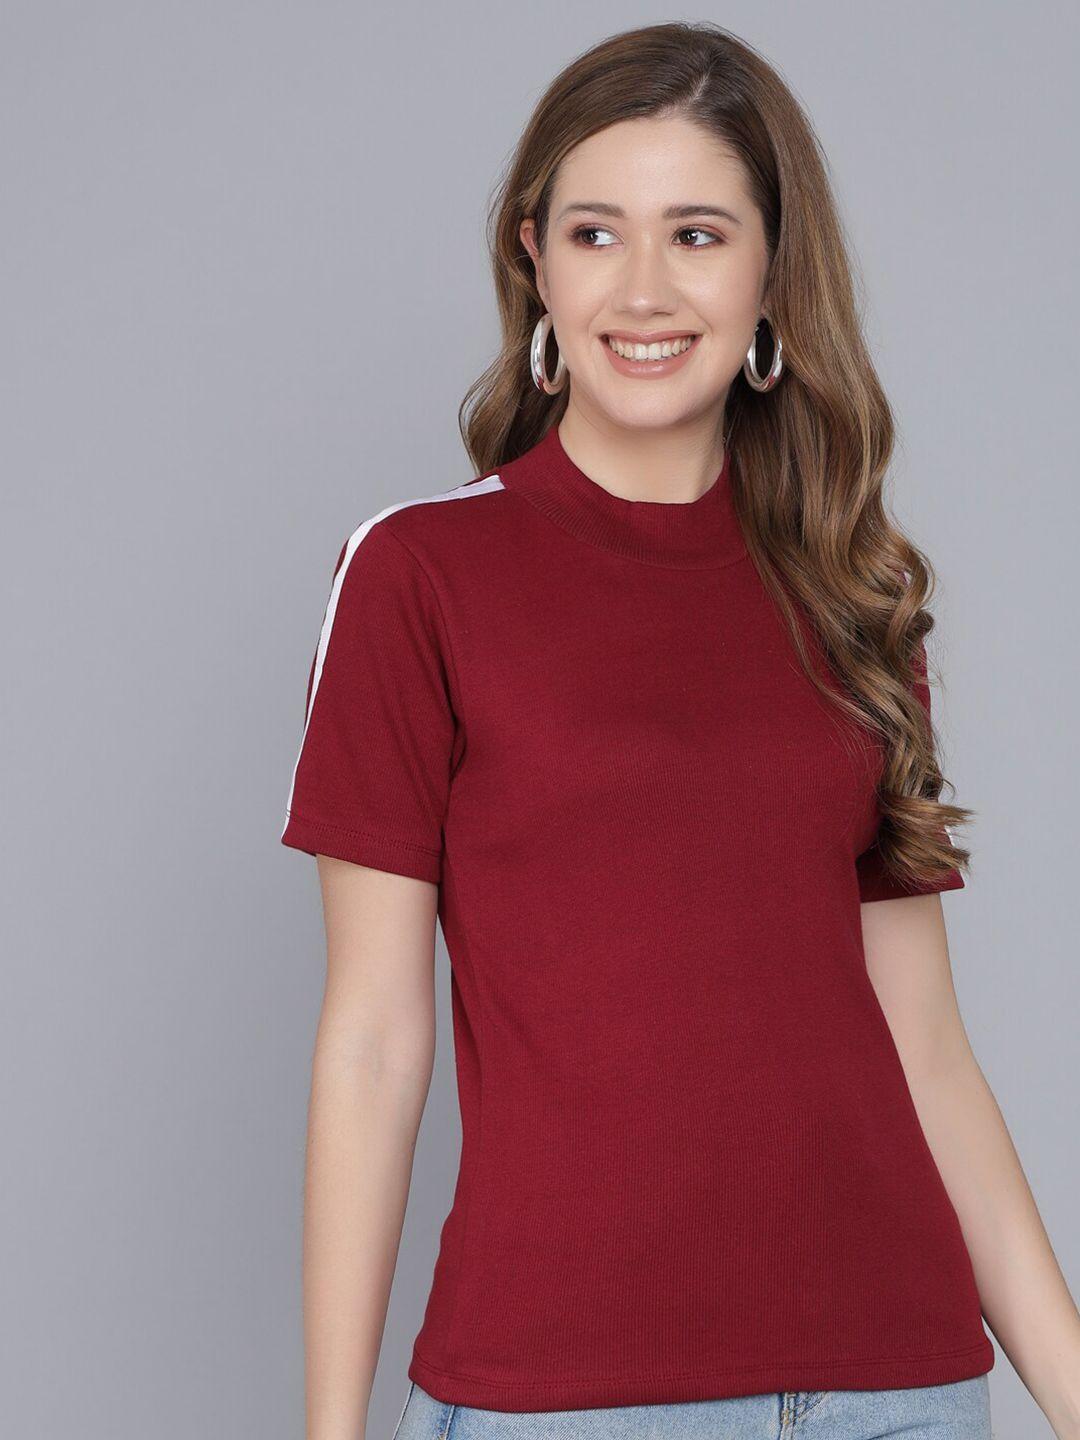 q-rious high neck short sleeves fitted top